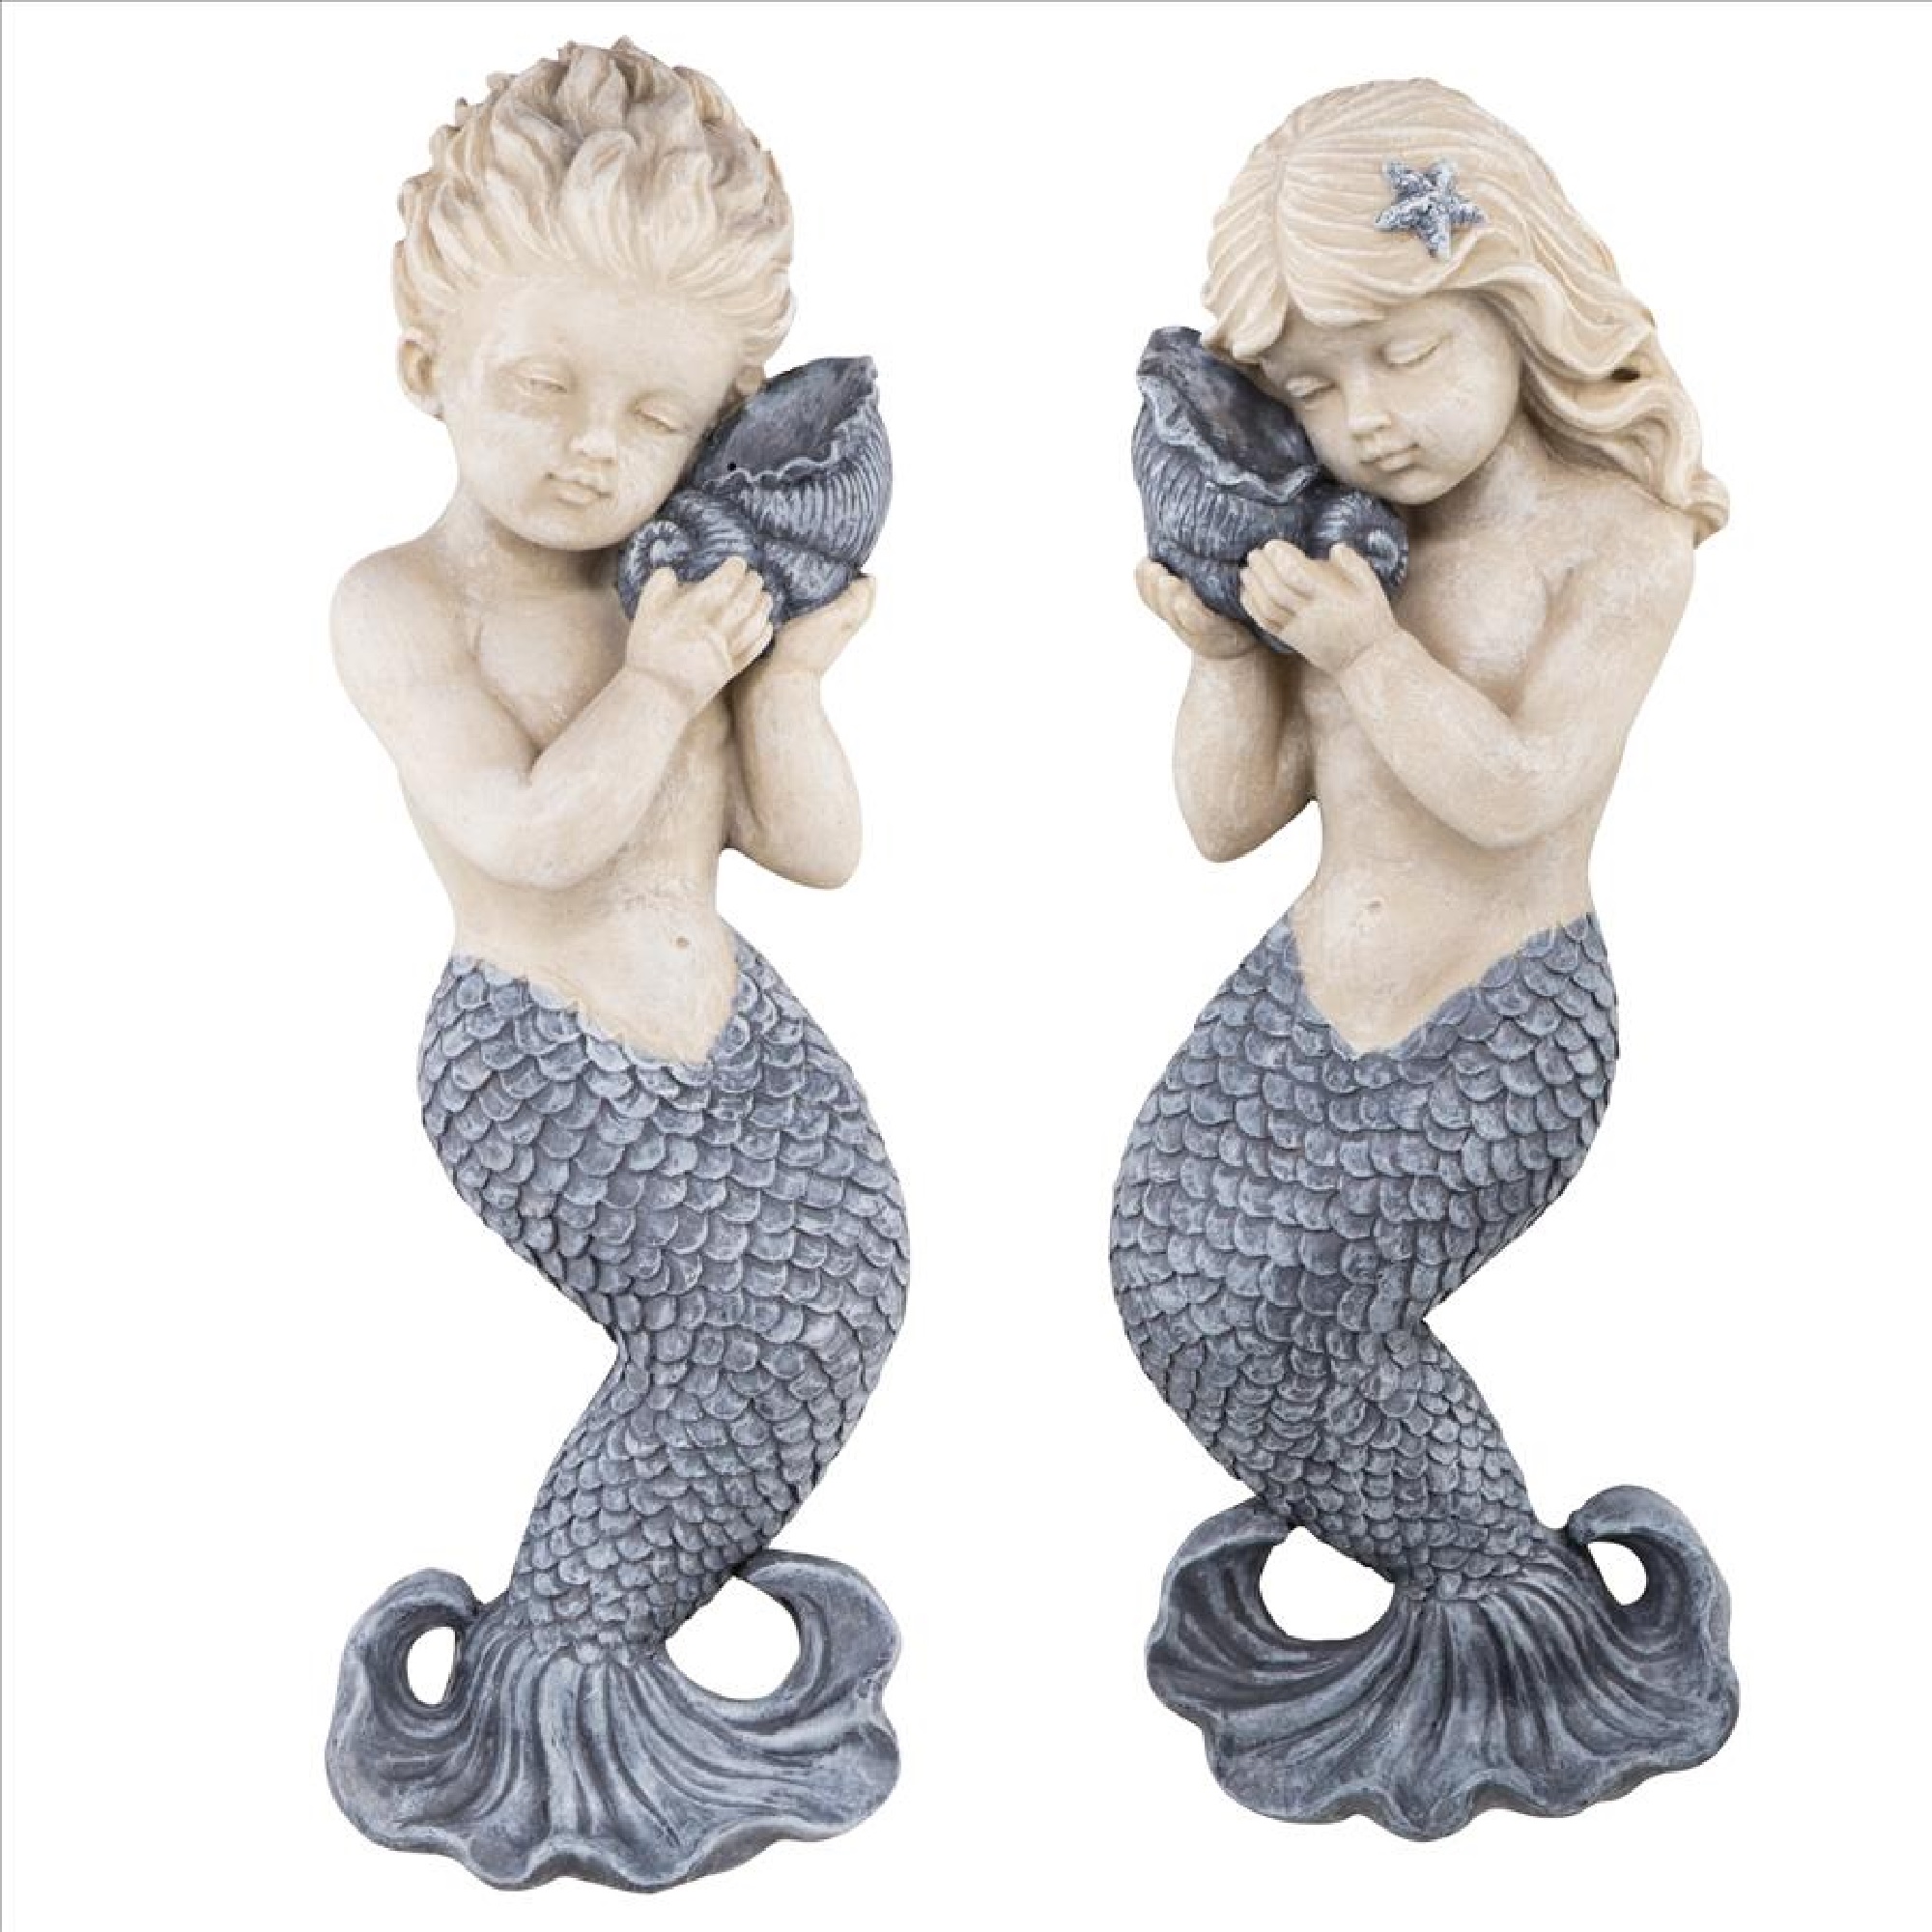 Outdoor Living and Style Sounds of the Sea Mermaid Wall Sculptures - 12.5"- Blue and Beige - Set of 2